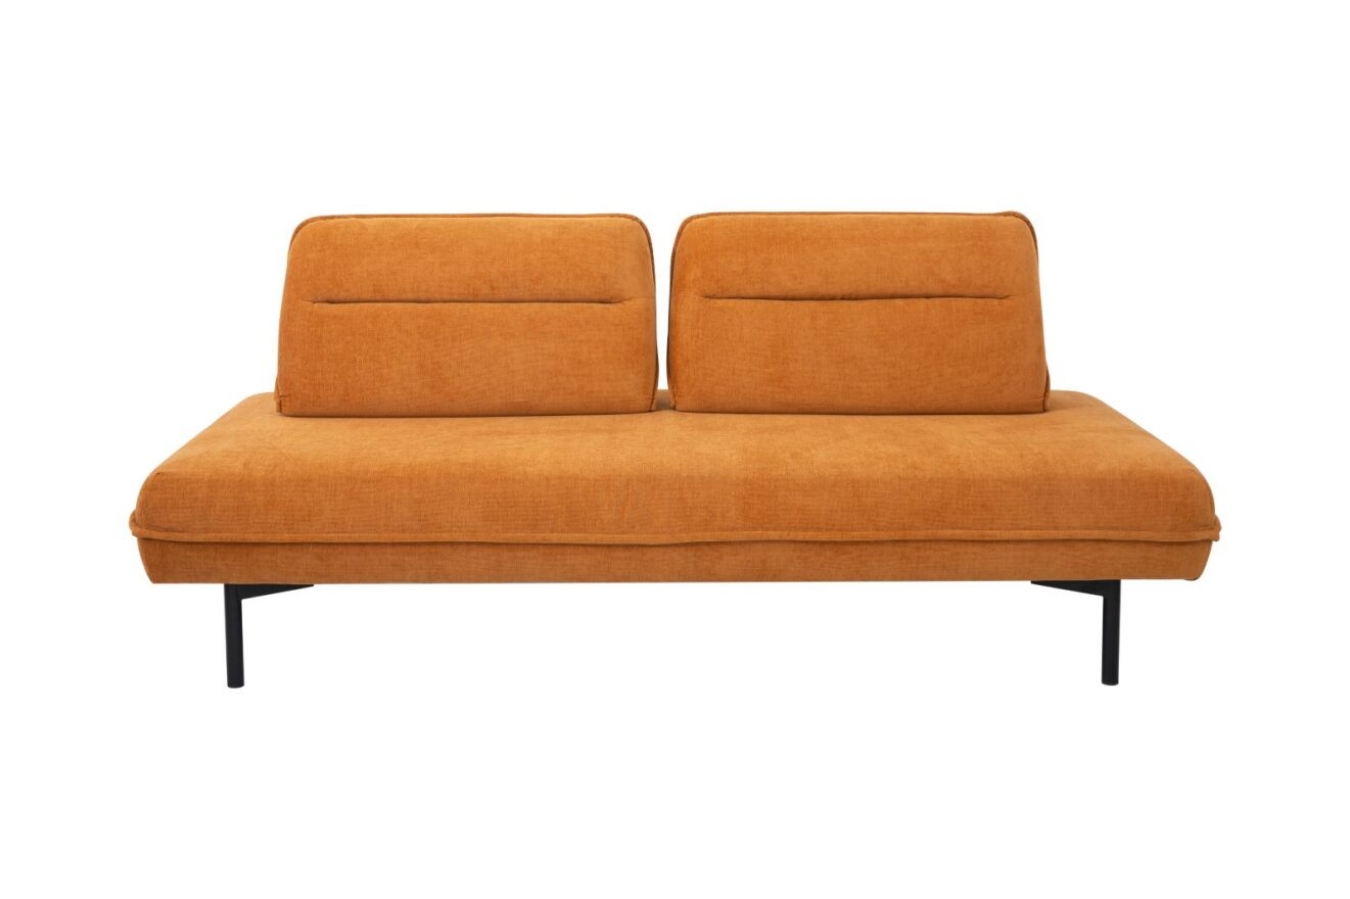 The Adam Sectional Sofa - a blend of comfort, style, and practicality for the modern home. 